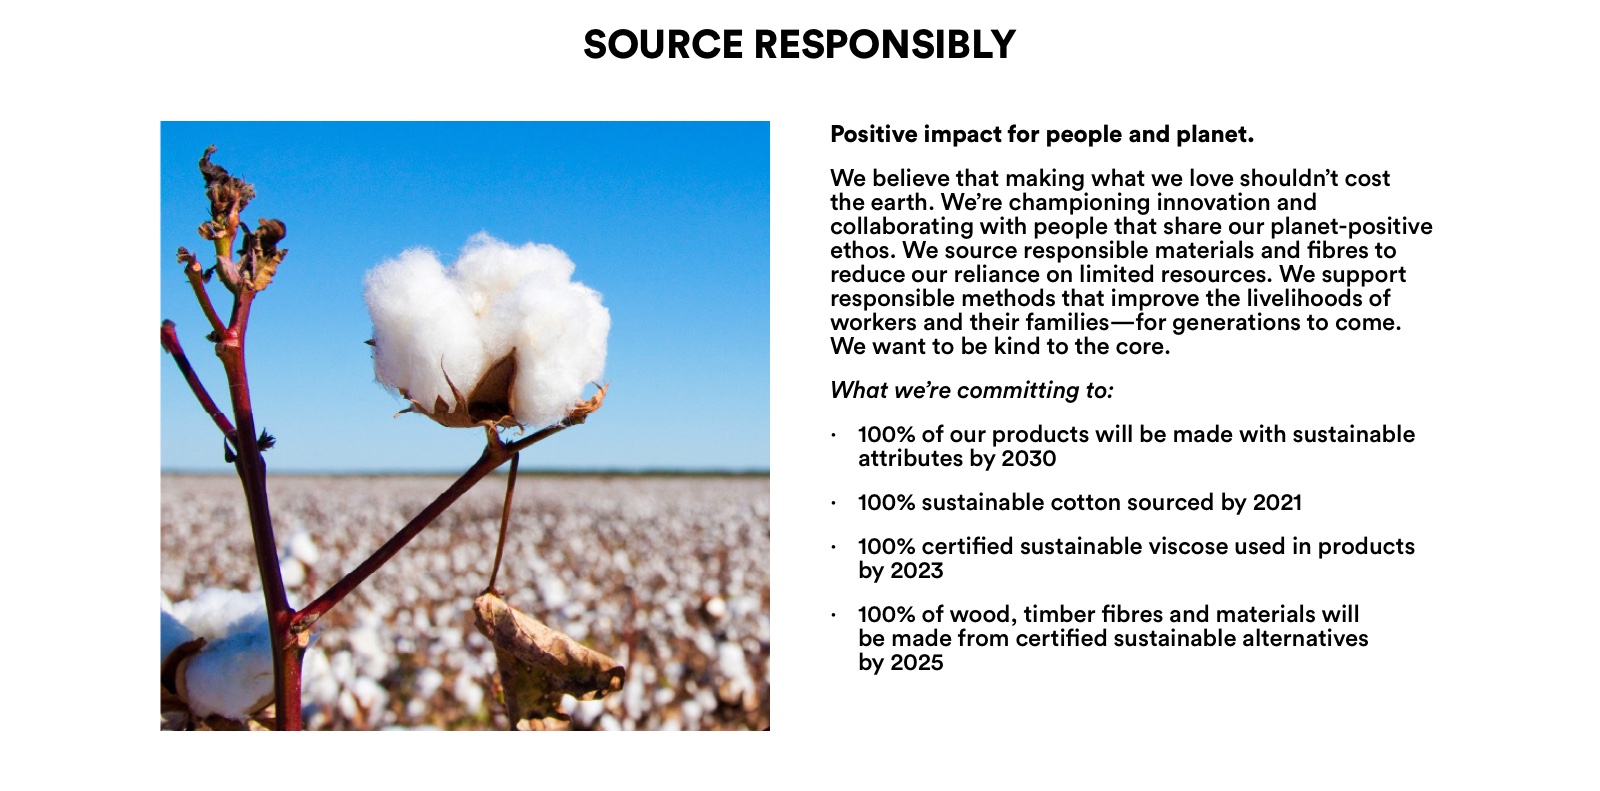 Source Responsibly. Positive Impact For People And Planet. We're Committing To: 100% Of Our Products Will Be Made With Sustainable Attributes By 2030.